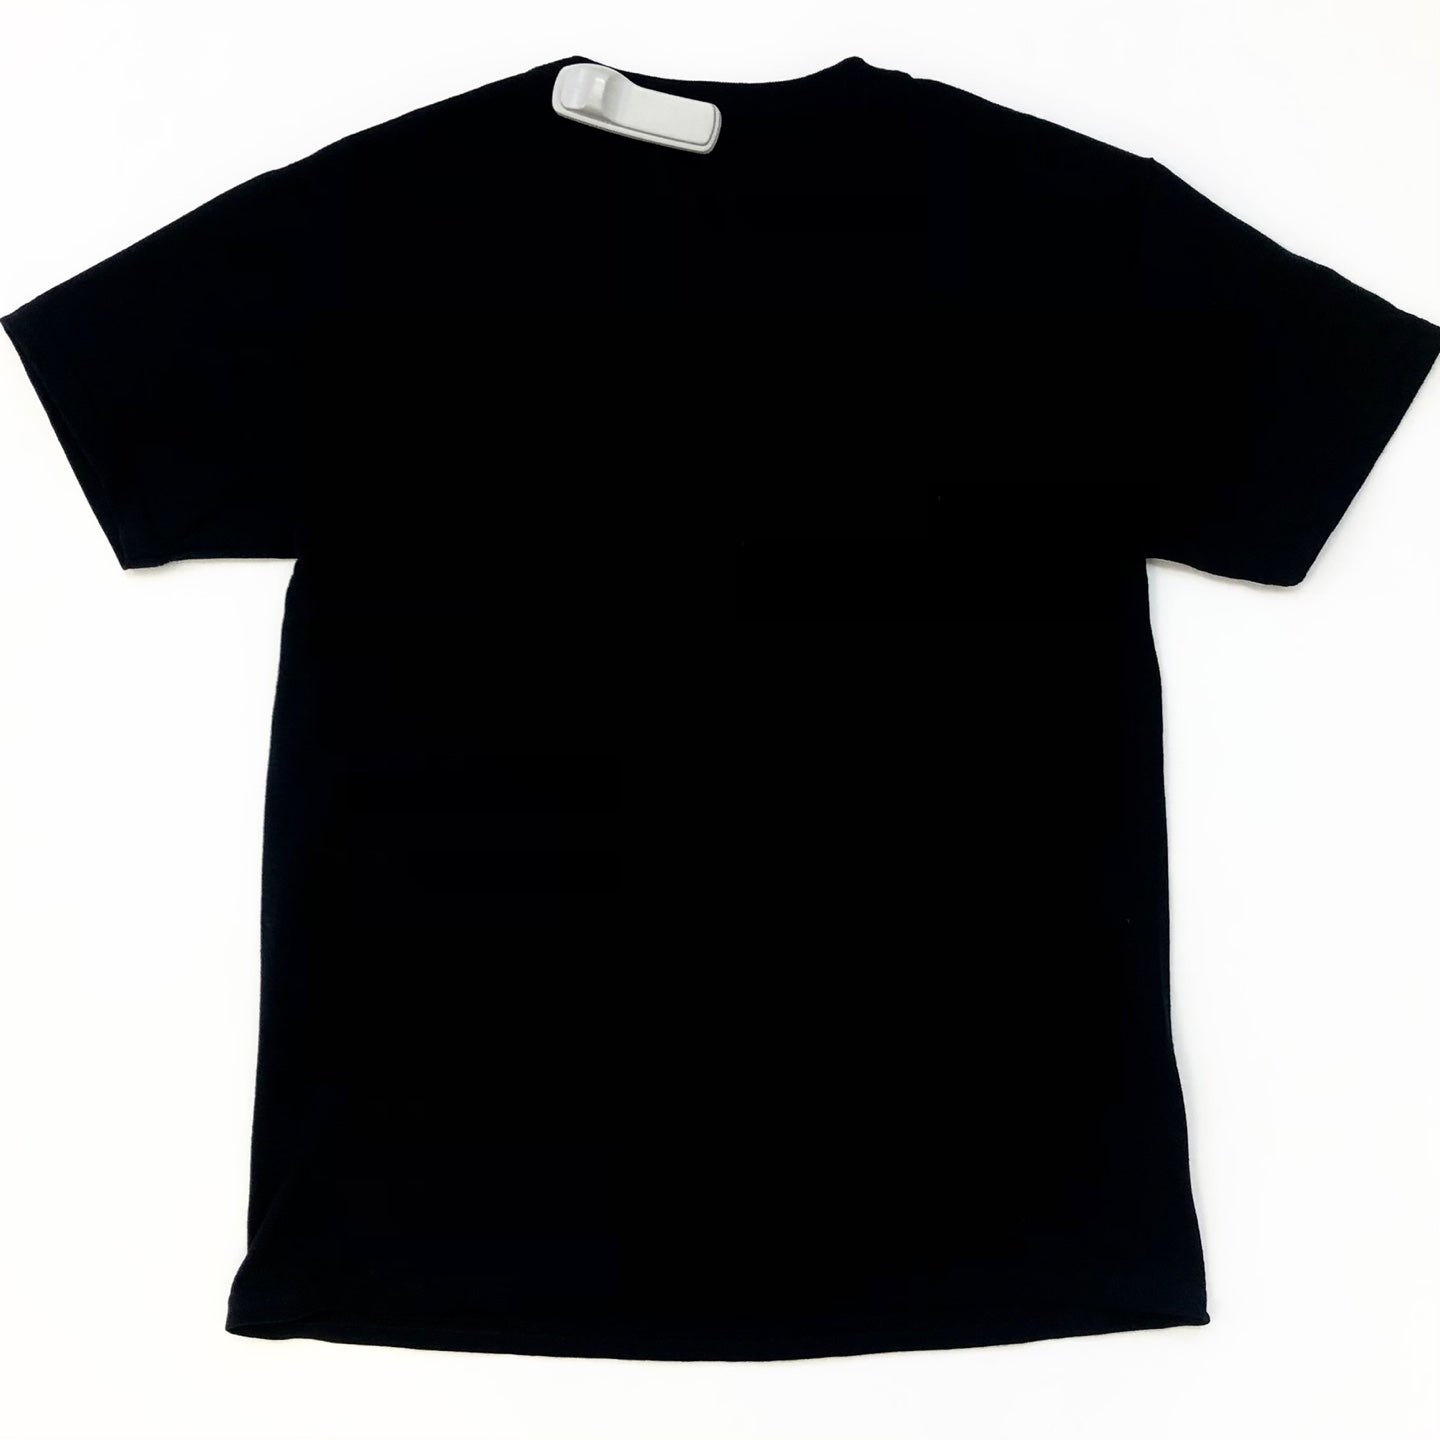 3FORTY High On Life Kid Graphic T-Shirt - Black